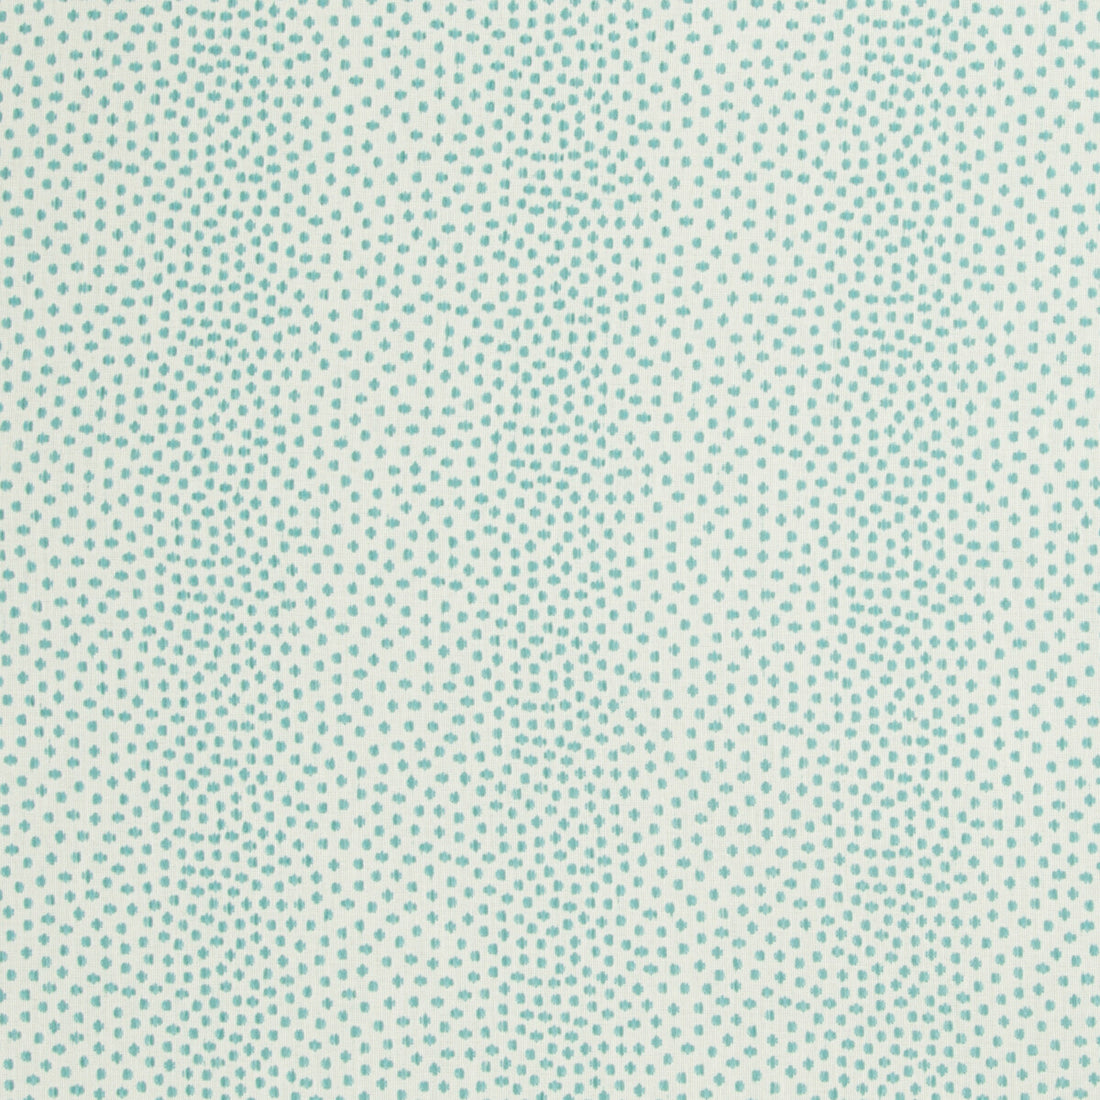 Kravet Contract fabric in 34748-35 color - pattern 34748.35.0 - by Kravet Contract in the Crypton Incase collection